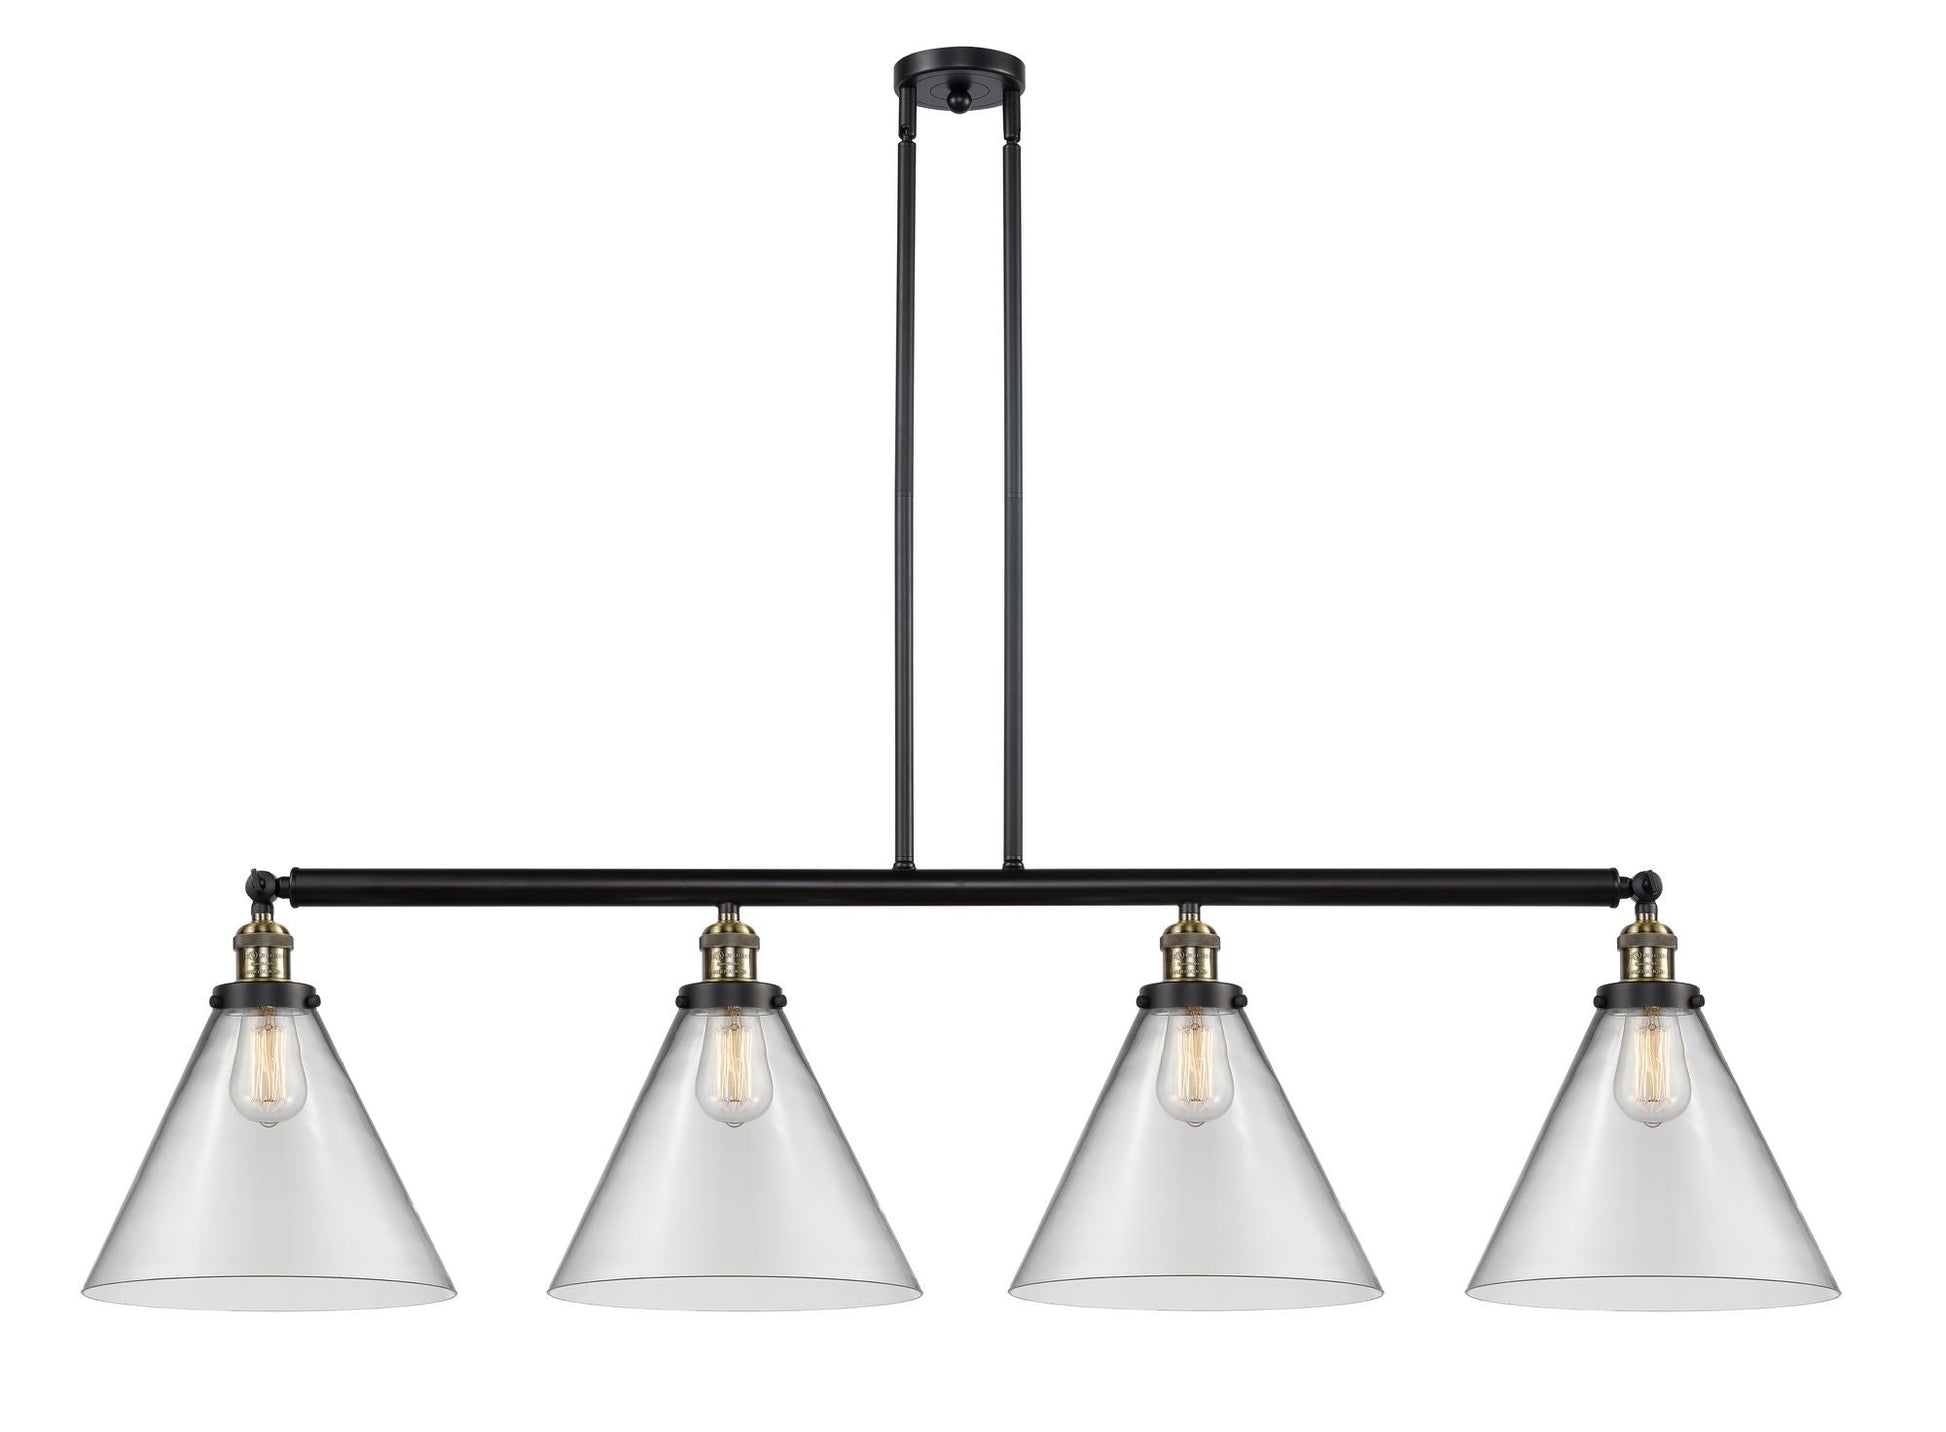 214-BAB-G42-L 4-Light 56" Black Antique Brass Island Light - Clear Cone 12" Glass - LED Bulb - Dimmensions: 56 x 12 x 14<br>Minimum Height : 24.25<br>Maximum Height : 48.25 - Sloped Ceiling Compatible: Yes